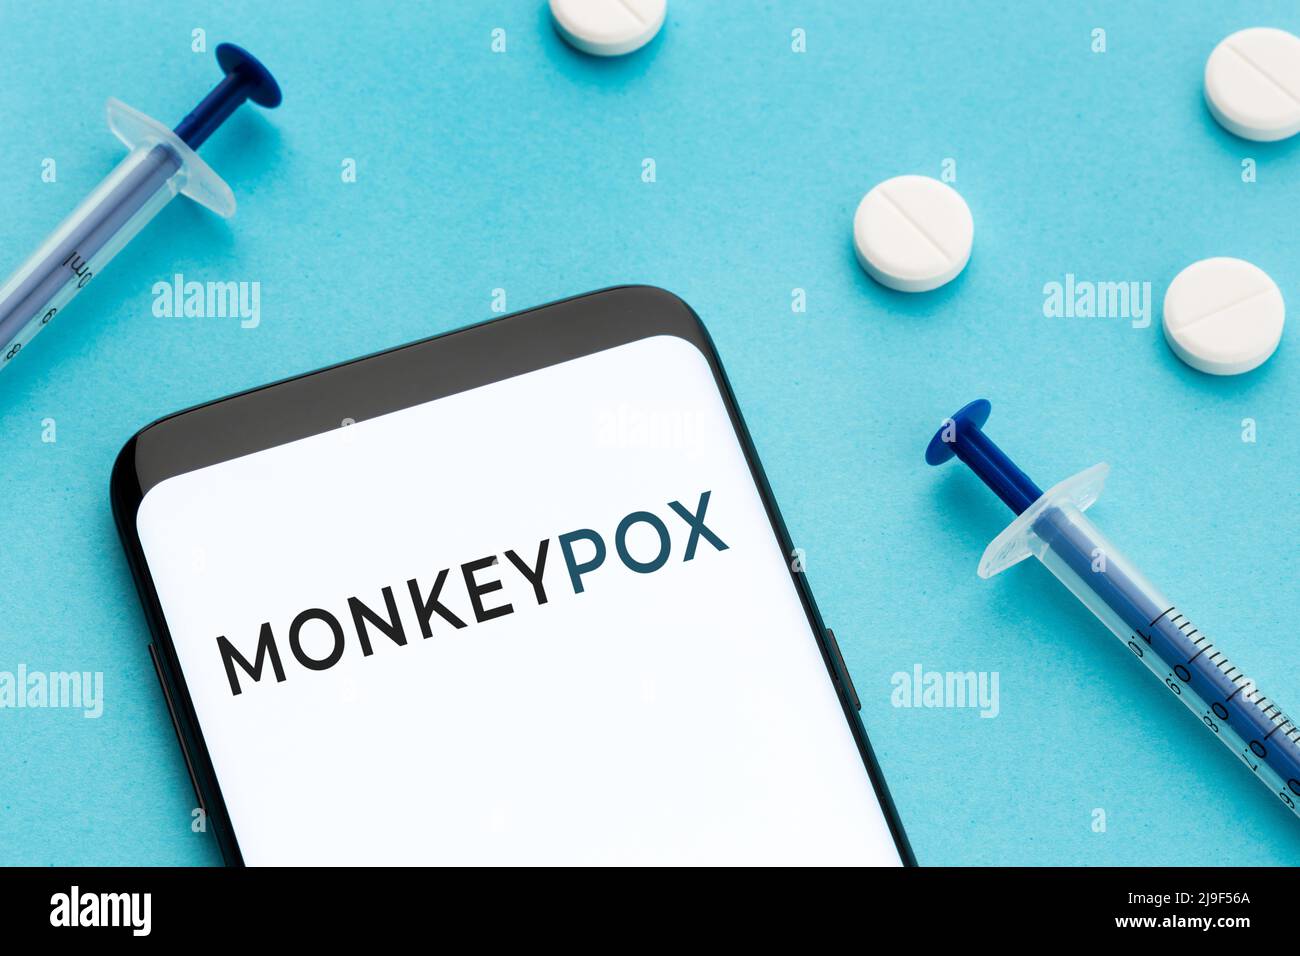 Samrtphone with text Monkeypox pills and syringes on blue background Stock Photo